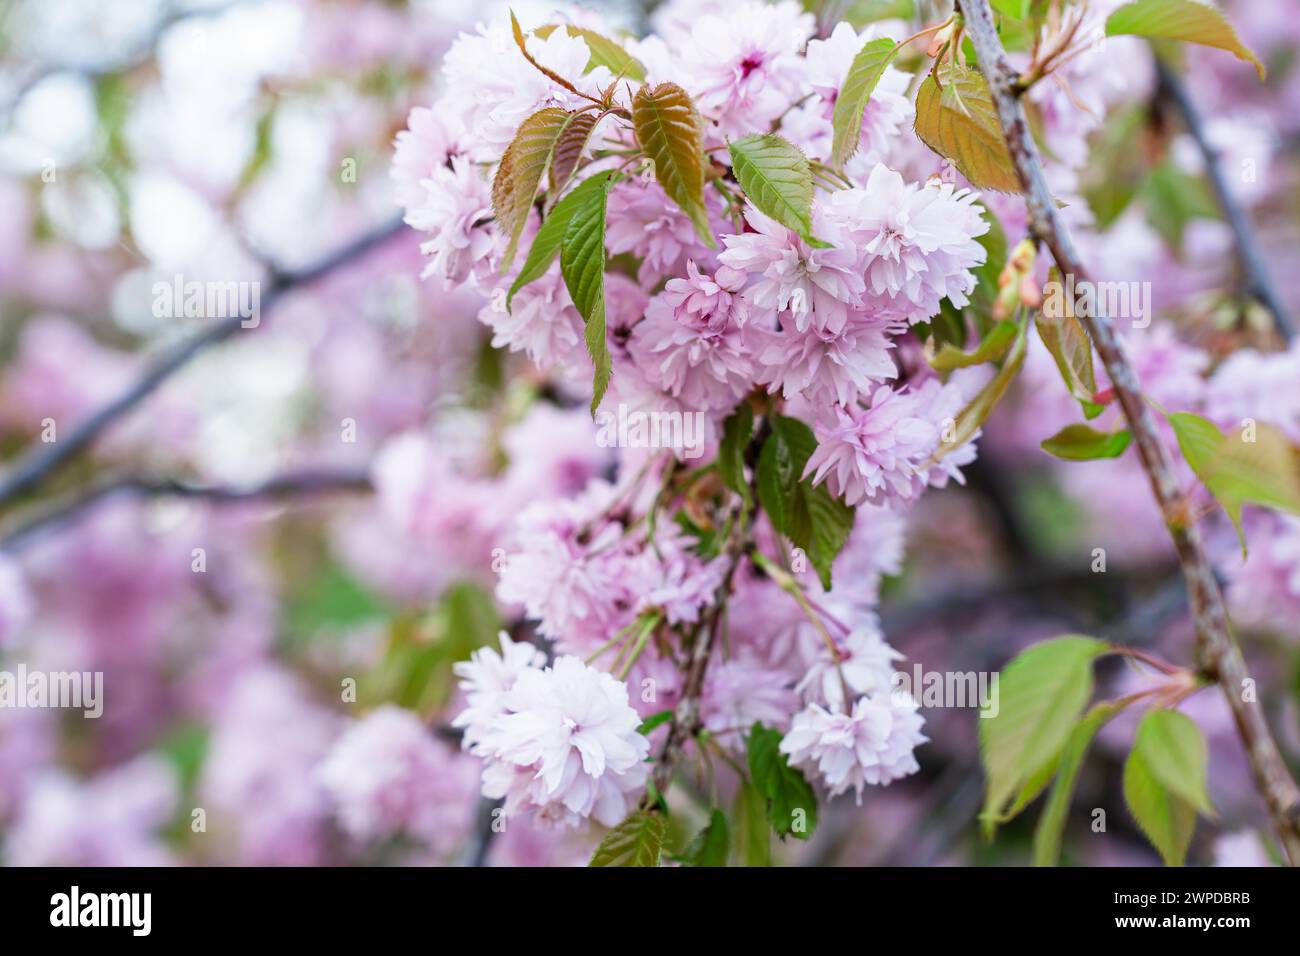 Beautiful soft pink spring Cherry blossom flowers and buds on the Prunus 'Kanzan' tree, a Japanese flowering Cherry tree Stock Photo